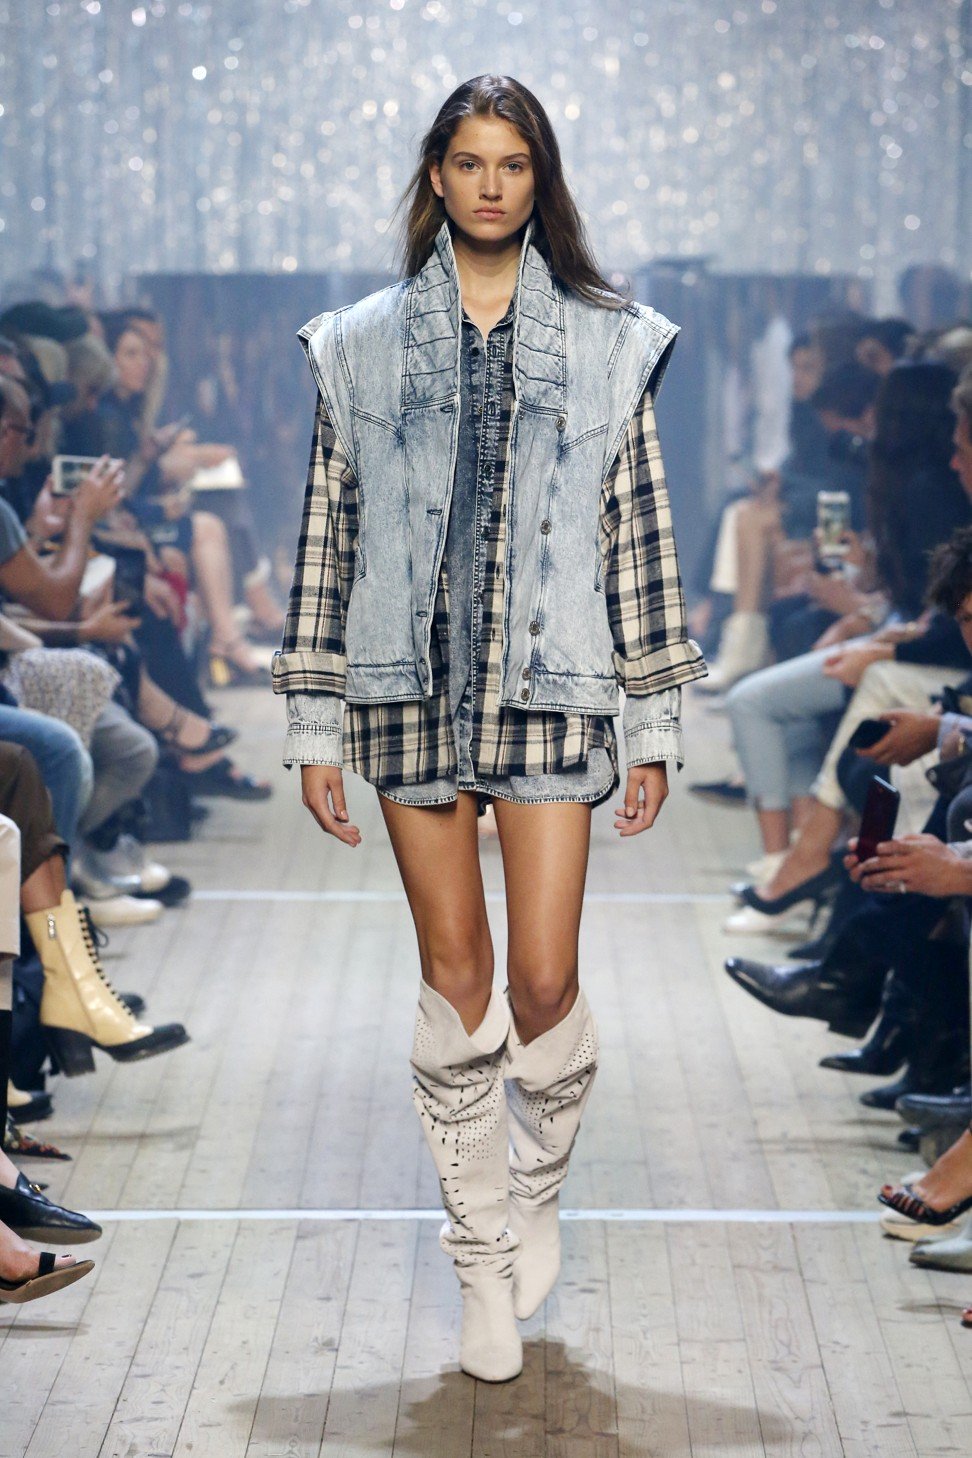 A look from Isabel Marant’s spring/summer 2019 collection. Checks are no longer a winter pattern.